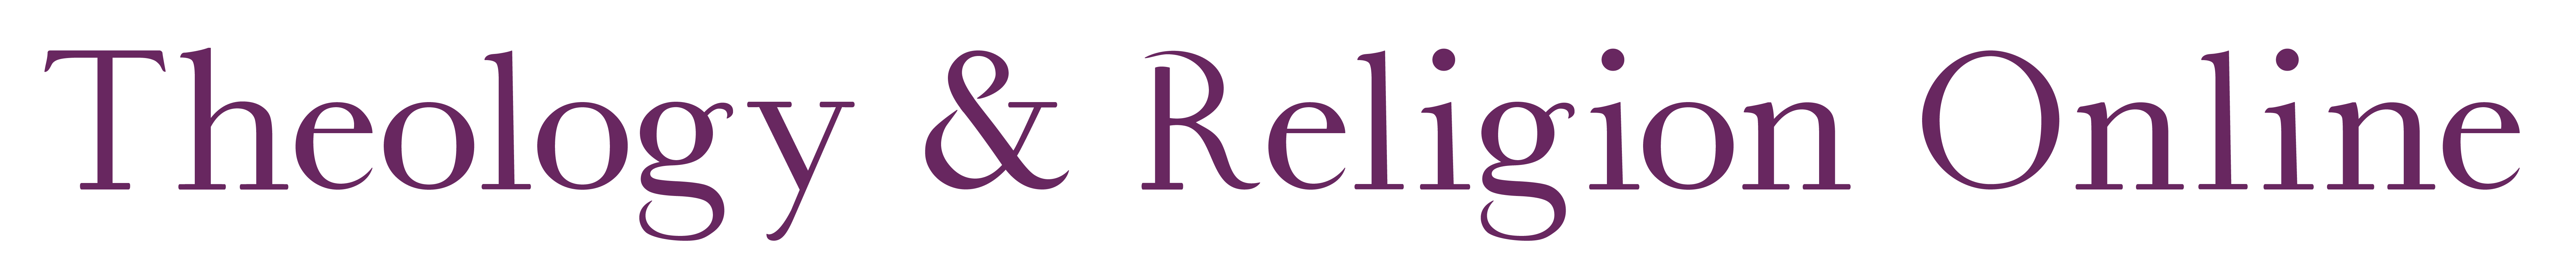 Theology and Religion Online Logo